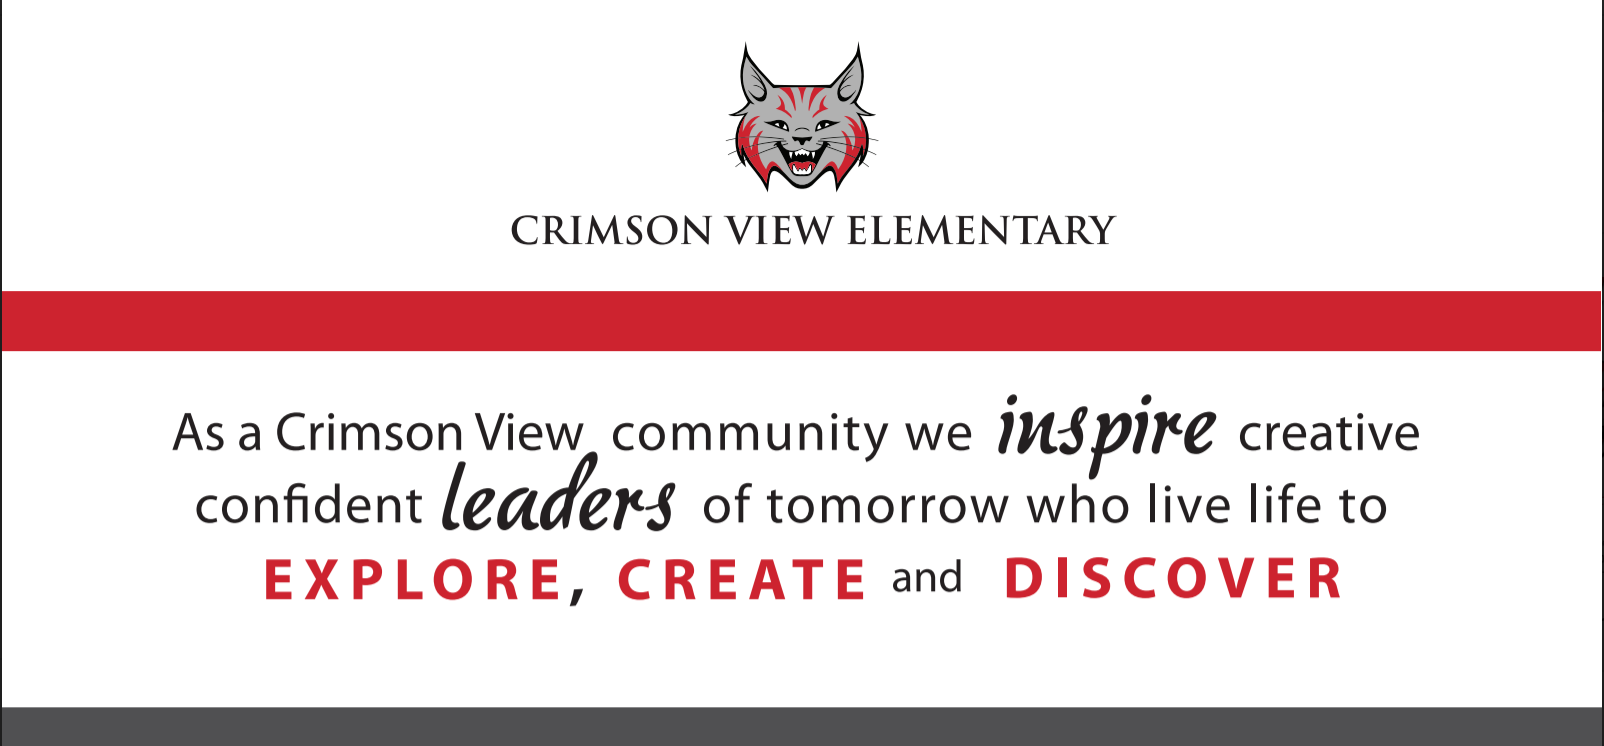 Crimson View Elementary Mission Statement to Explore, Create and Discover